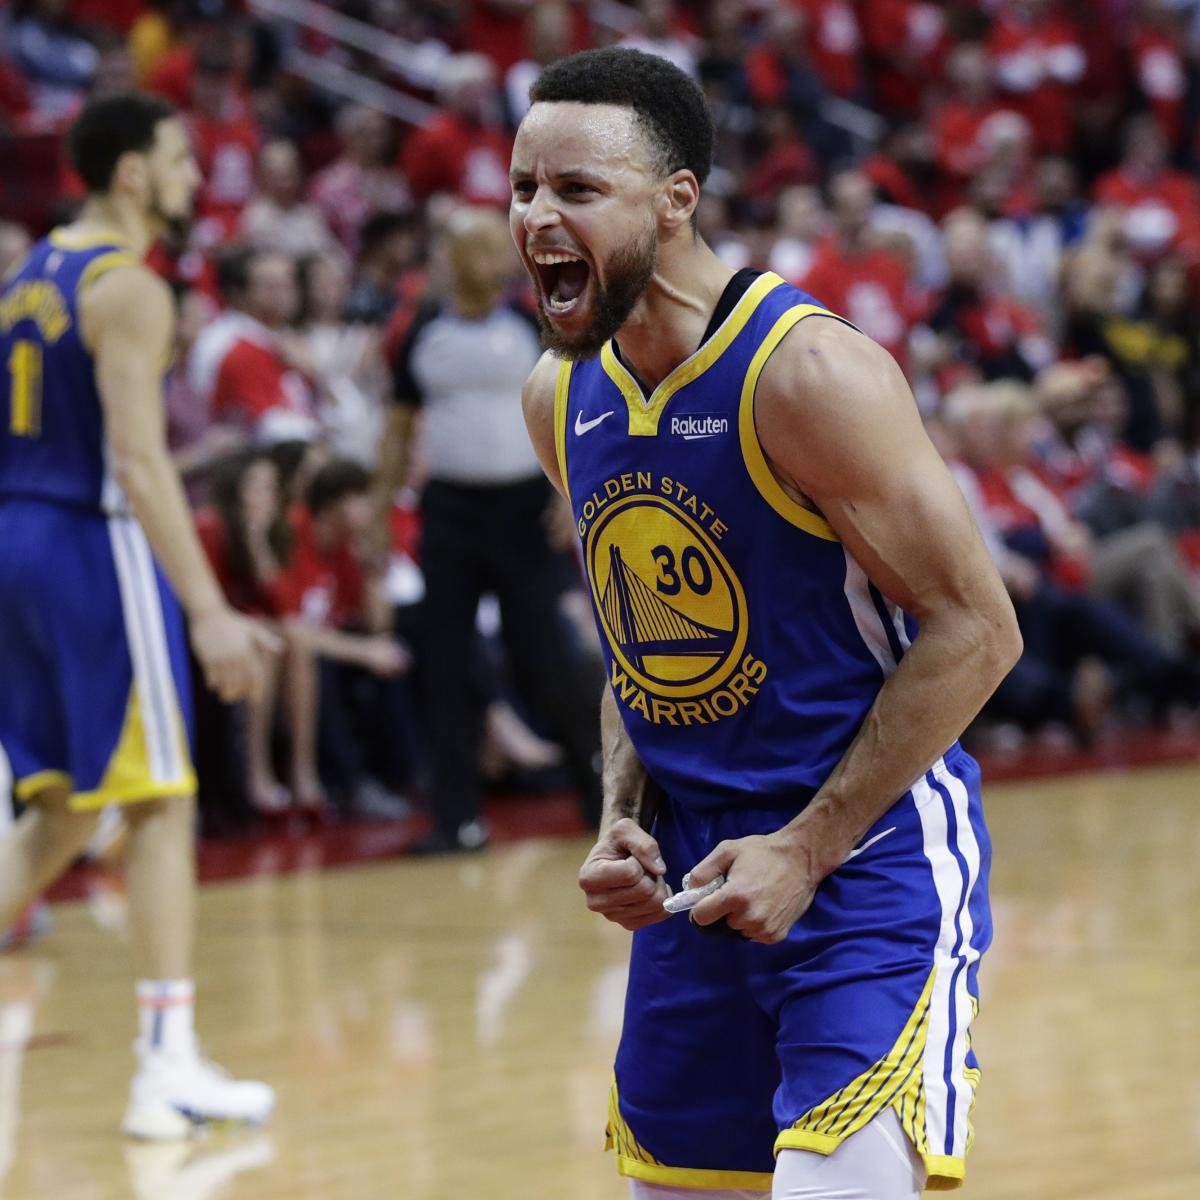 Raptors Vs Warriors 2019 Nba Finals Full Schedule Times And Predictions Bleacher Report Latest News Videos And Highlights